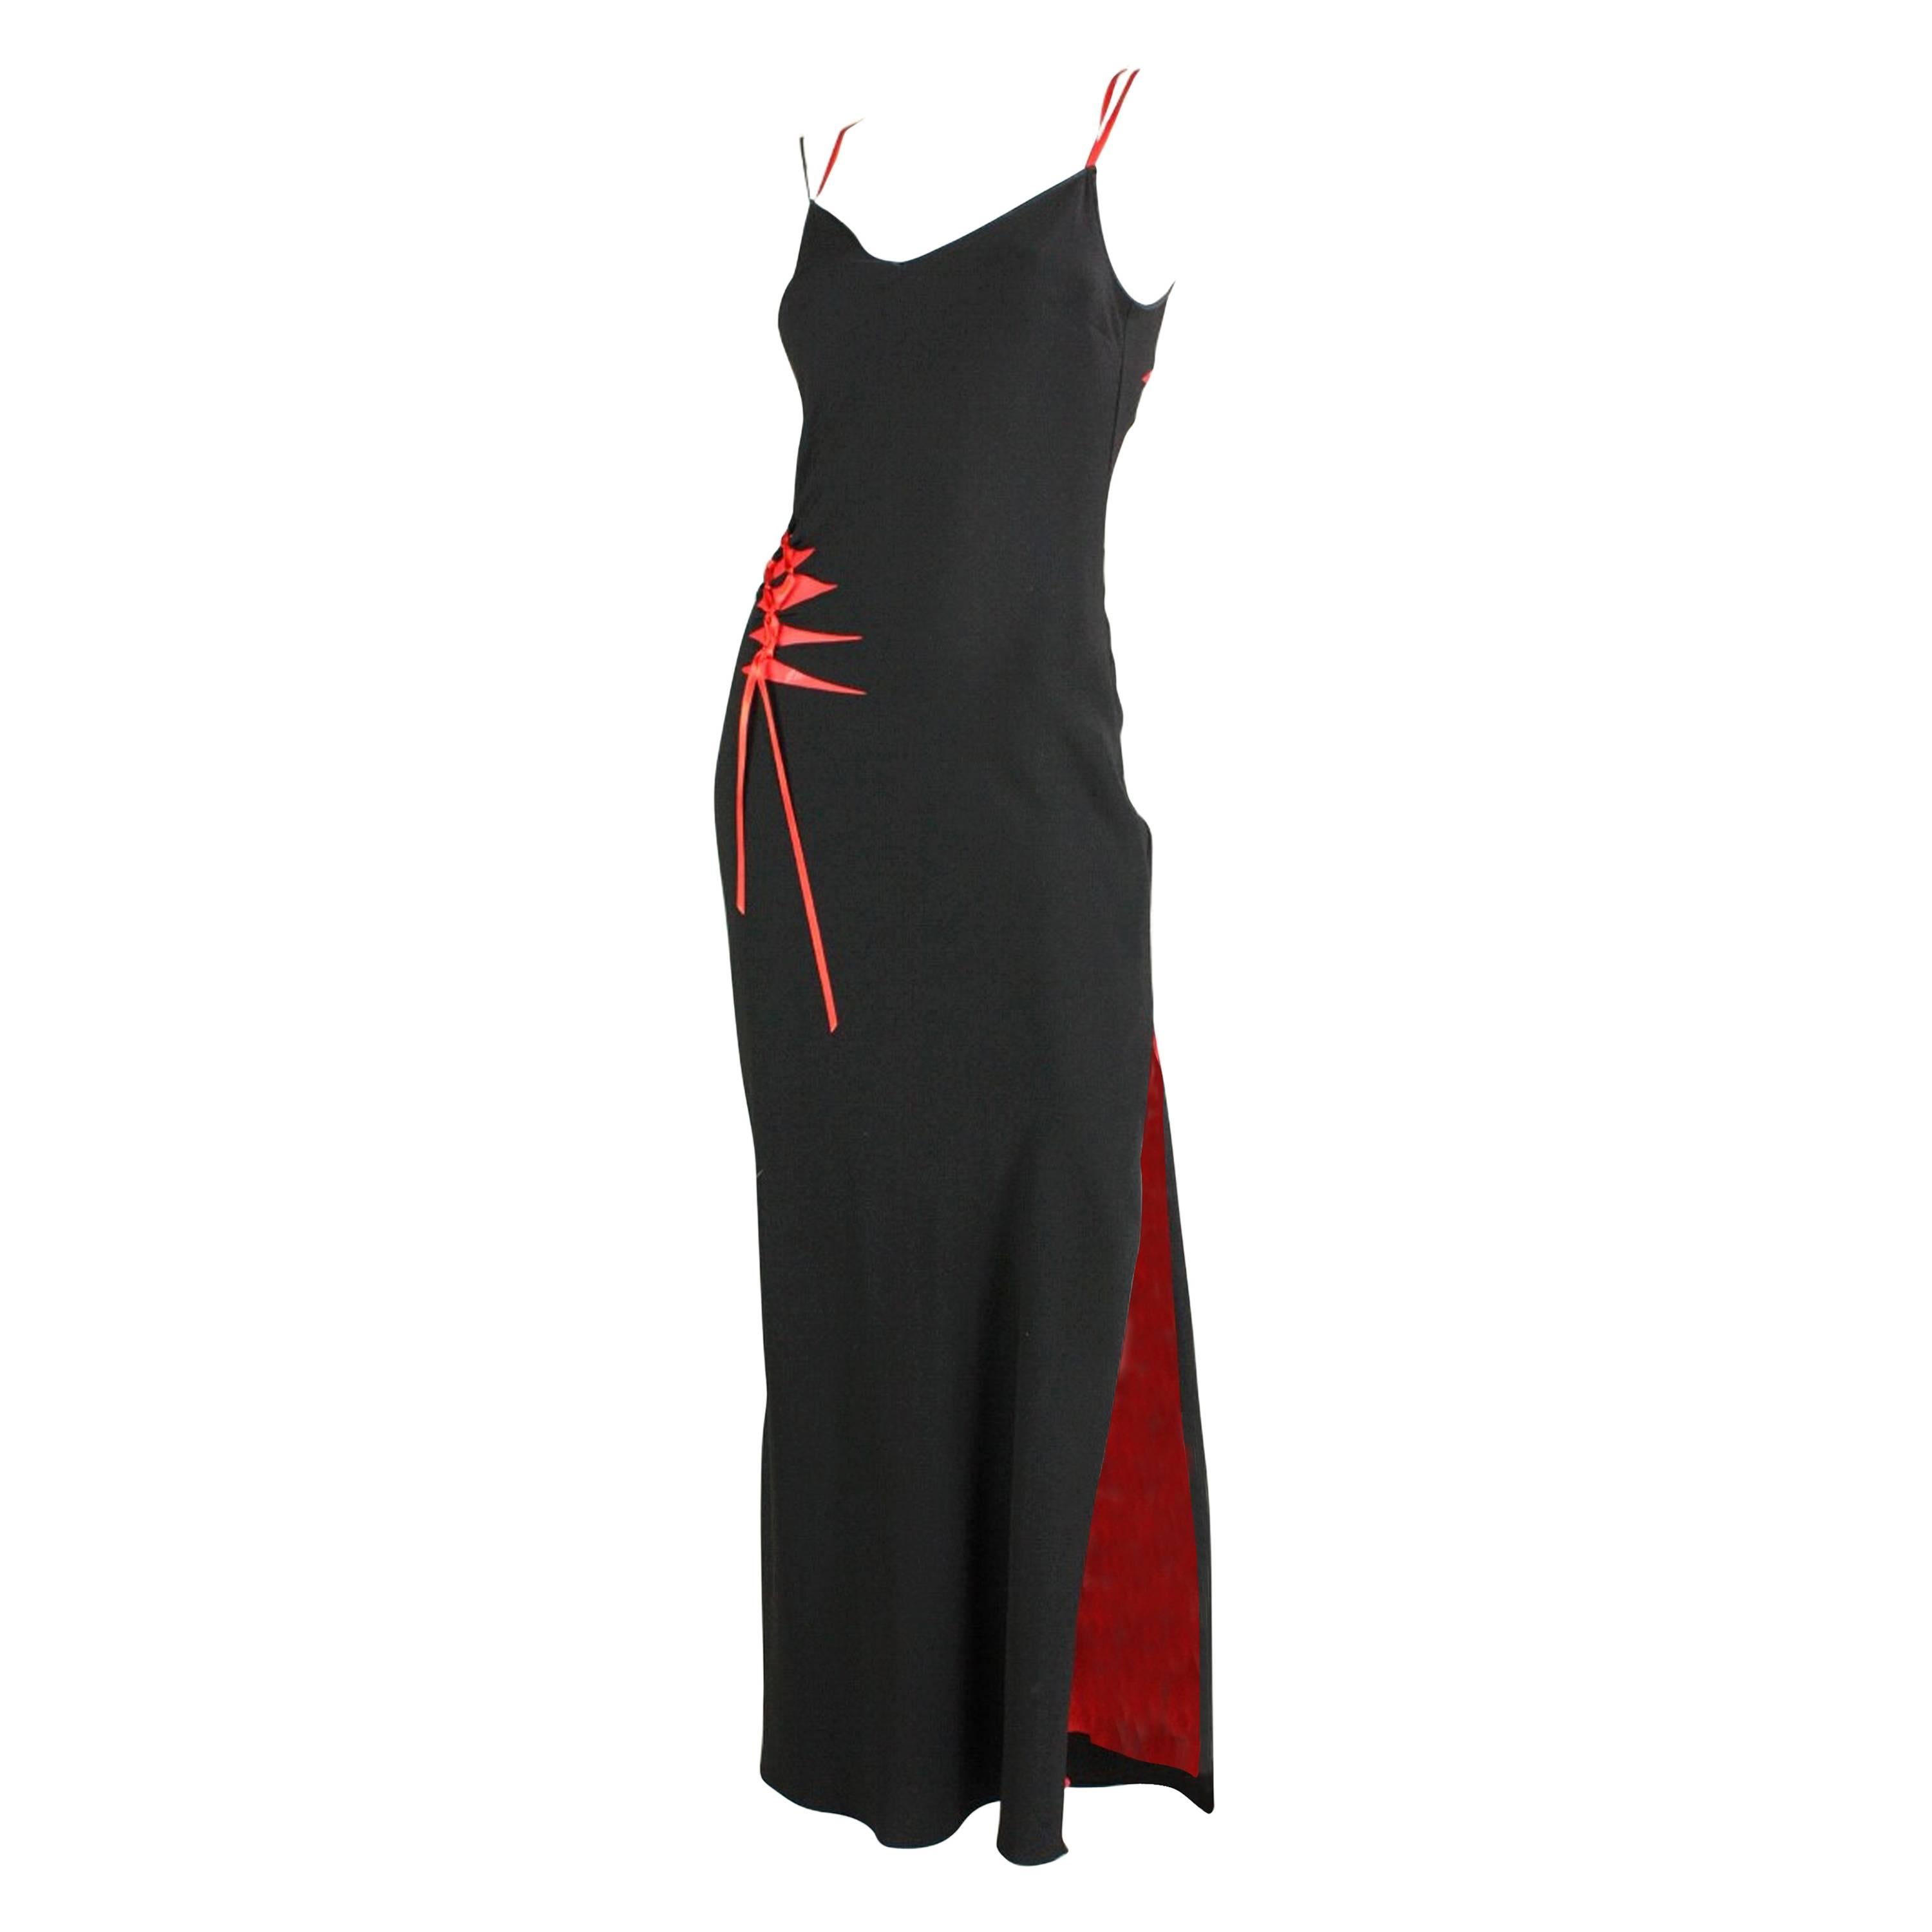 John Galliano Black Dress with Cut-Outs